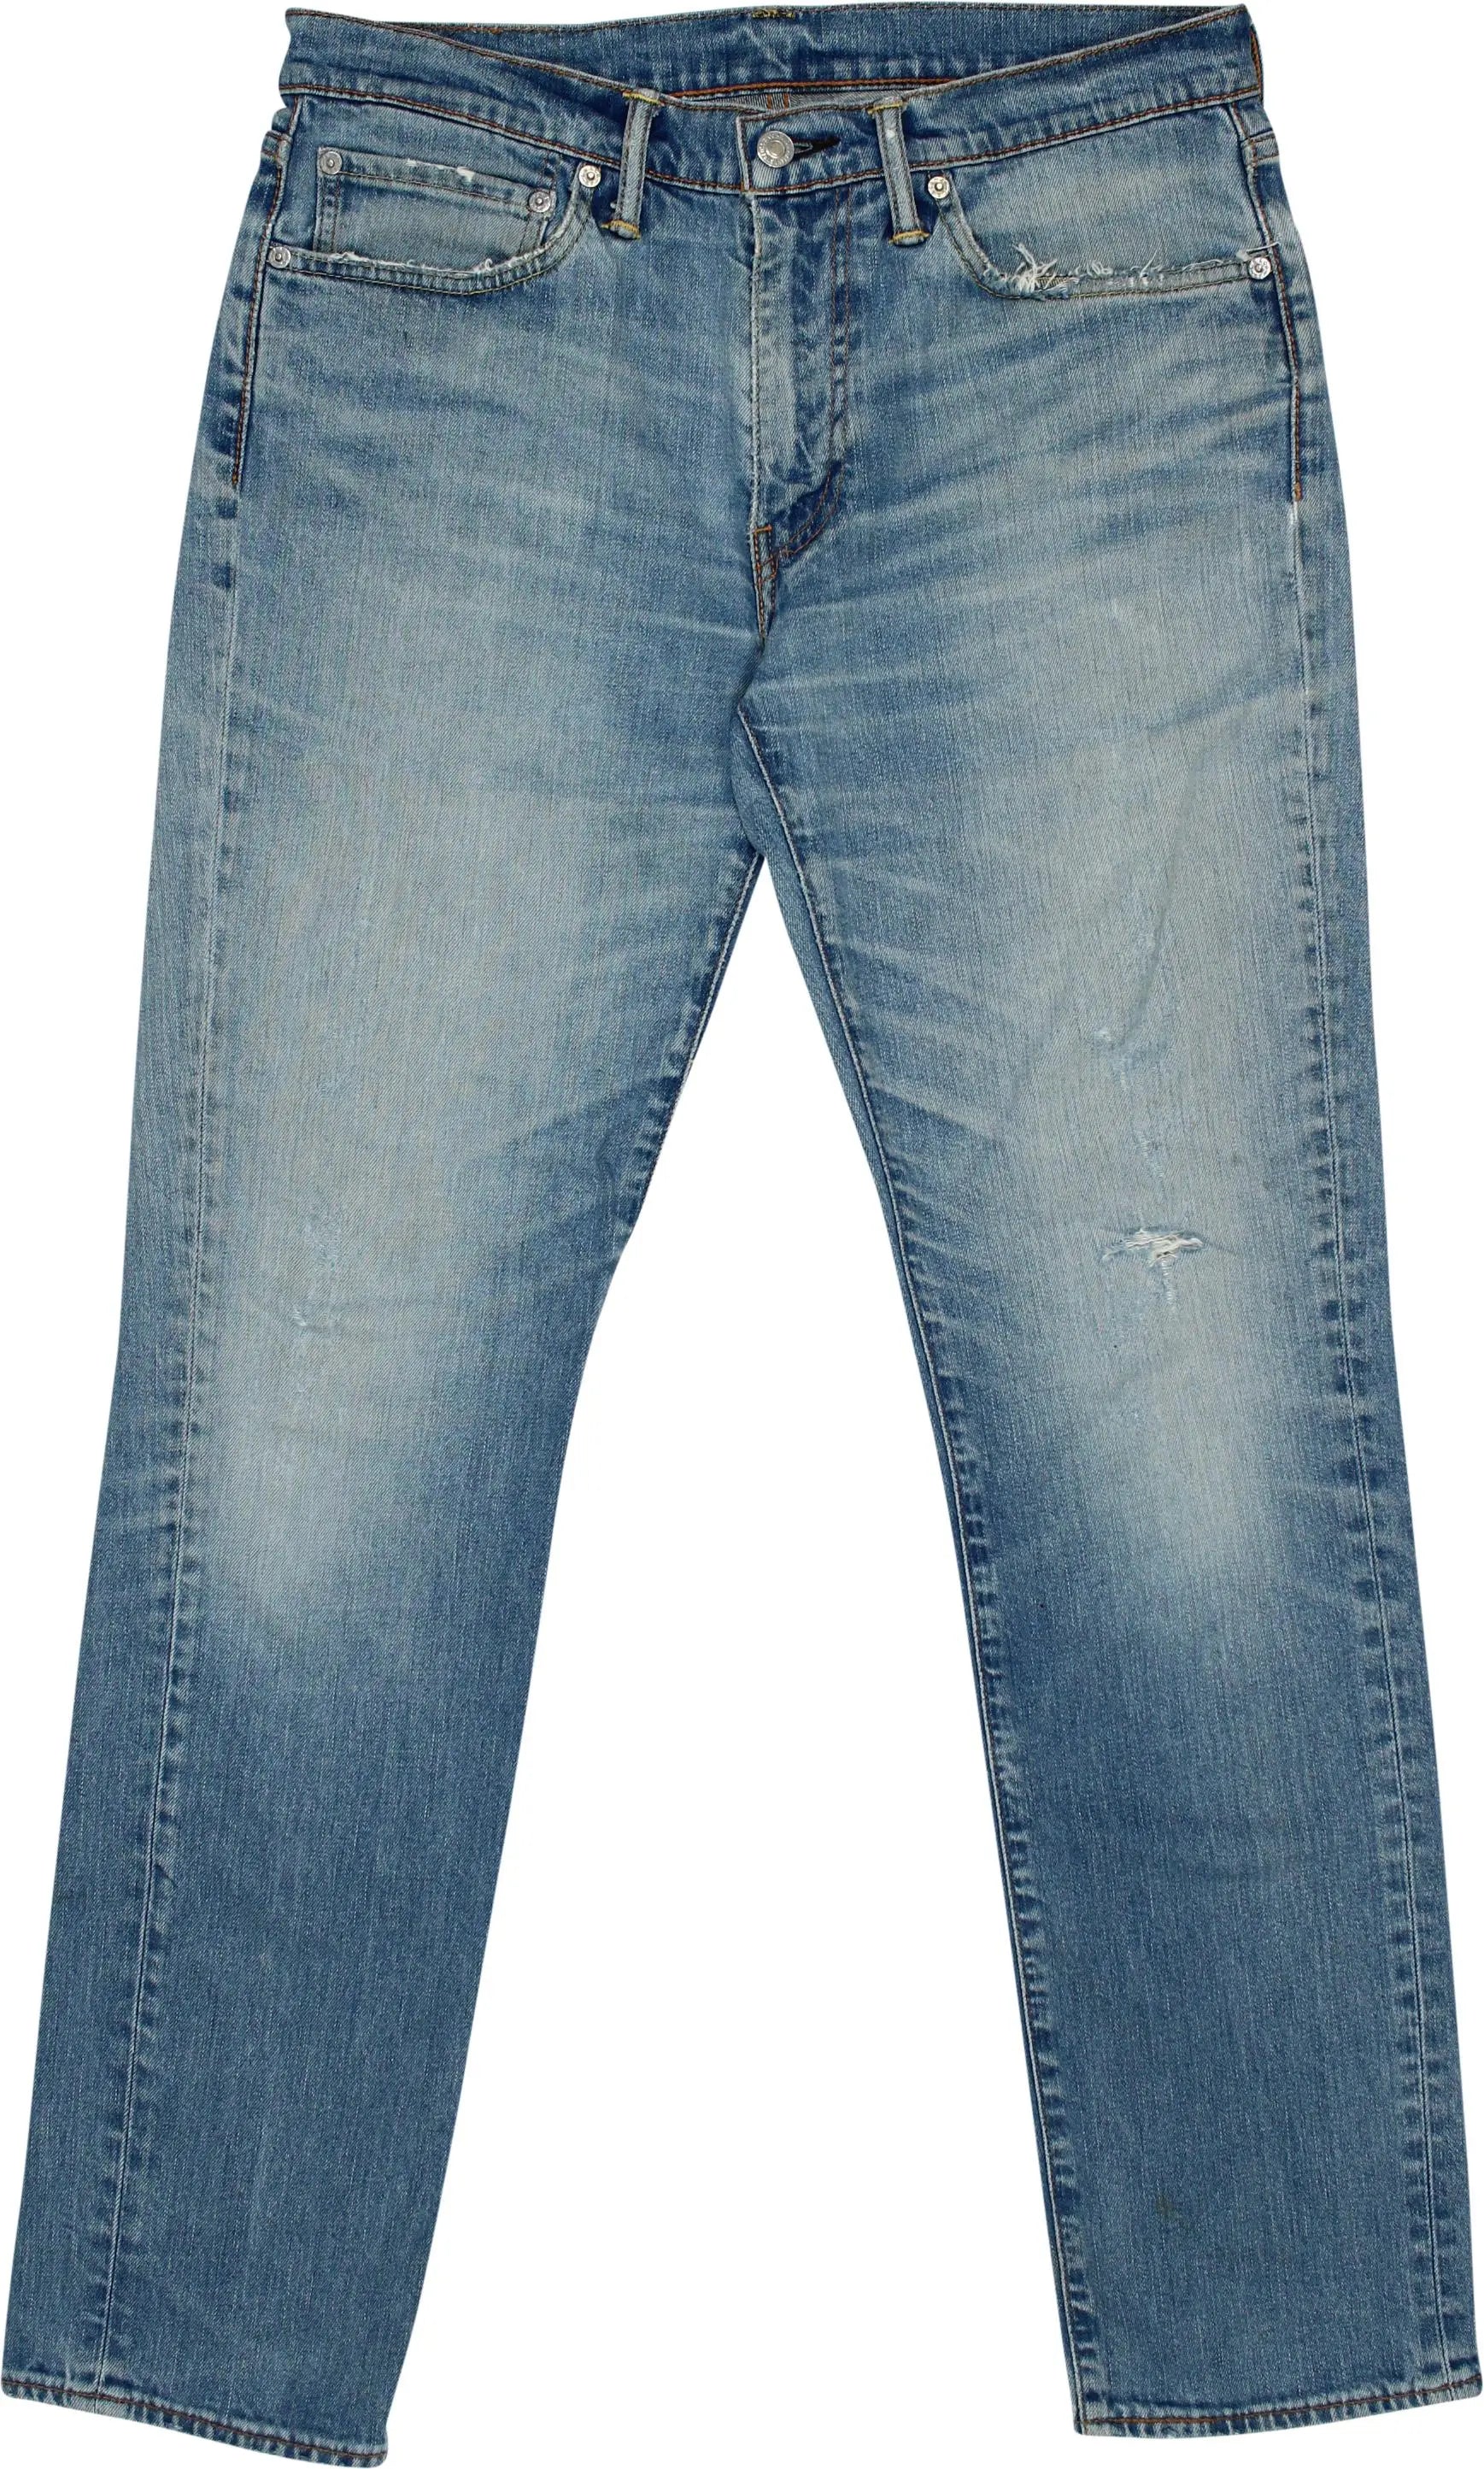 Levi's - 511 Jeans by Levi's- ThriftTale.com - Vintage and second handclothing